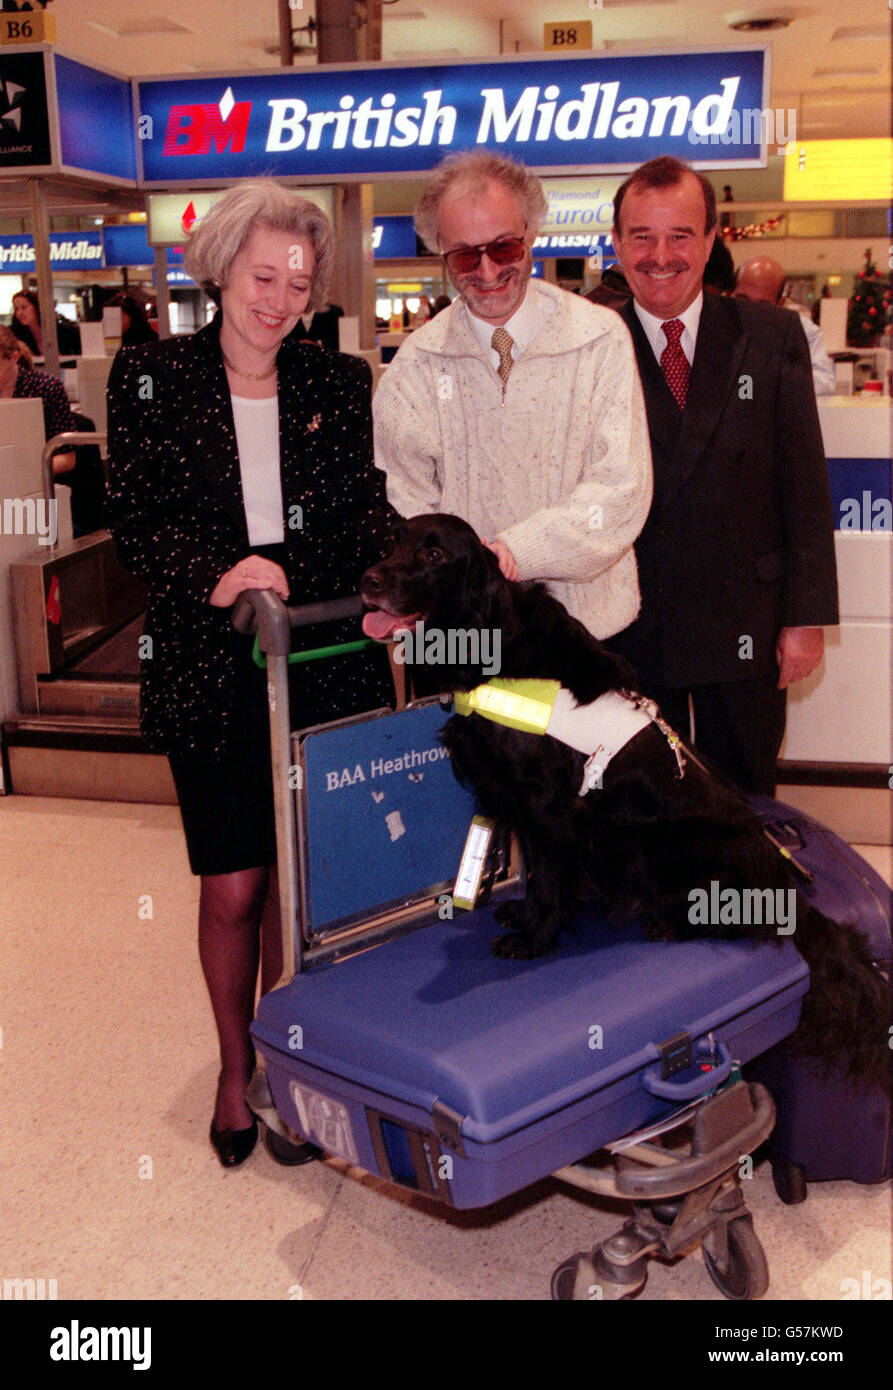 (L-R) Baroness Hayman, minister of State at MAFF, Mike Nussbaum and his guide dog Gretl and Rohan Alce, director of Cargo at Heathrow Airport in London. British Midland are celebrating the addition of Madrid and Brussels to their existing network covered under the pet travel scheme. * British Midland were the first UK airline to participate in the pet travel scheme and now operates the scheme to Amsterdam and Palma. Stock Photo